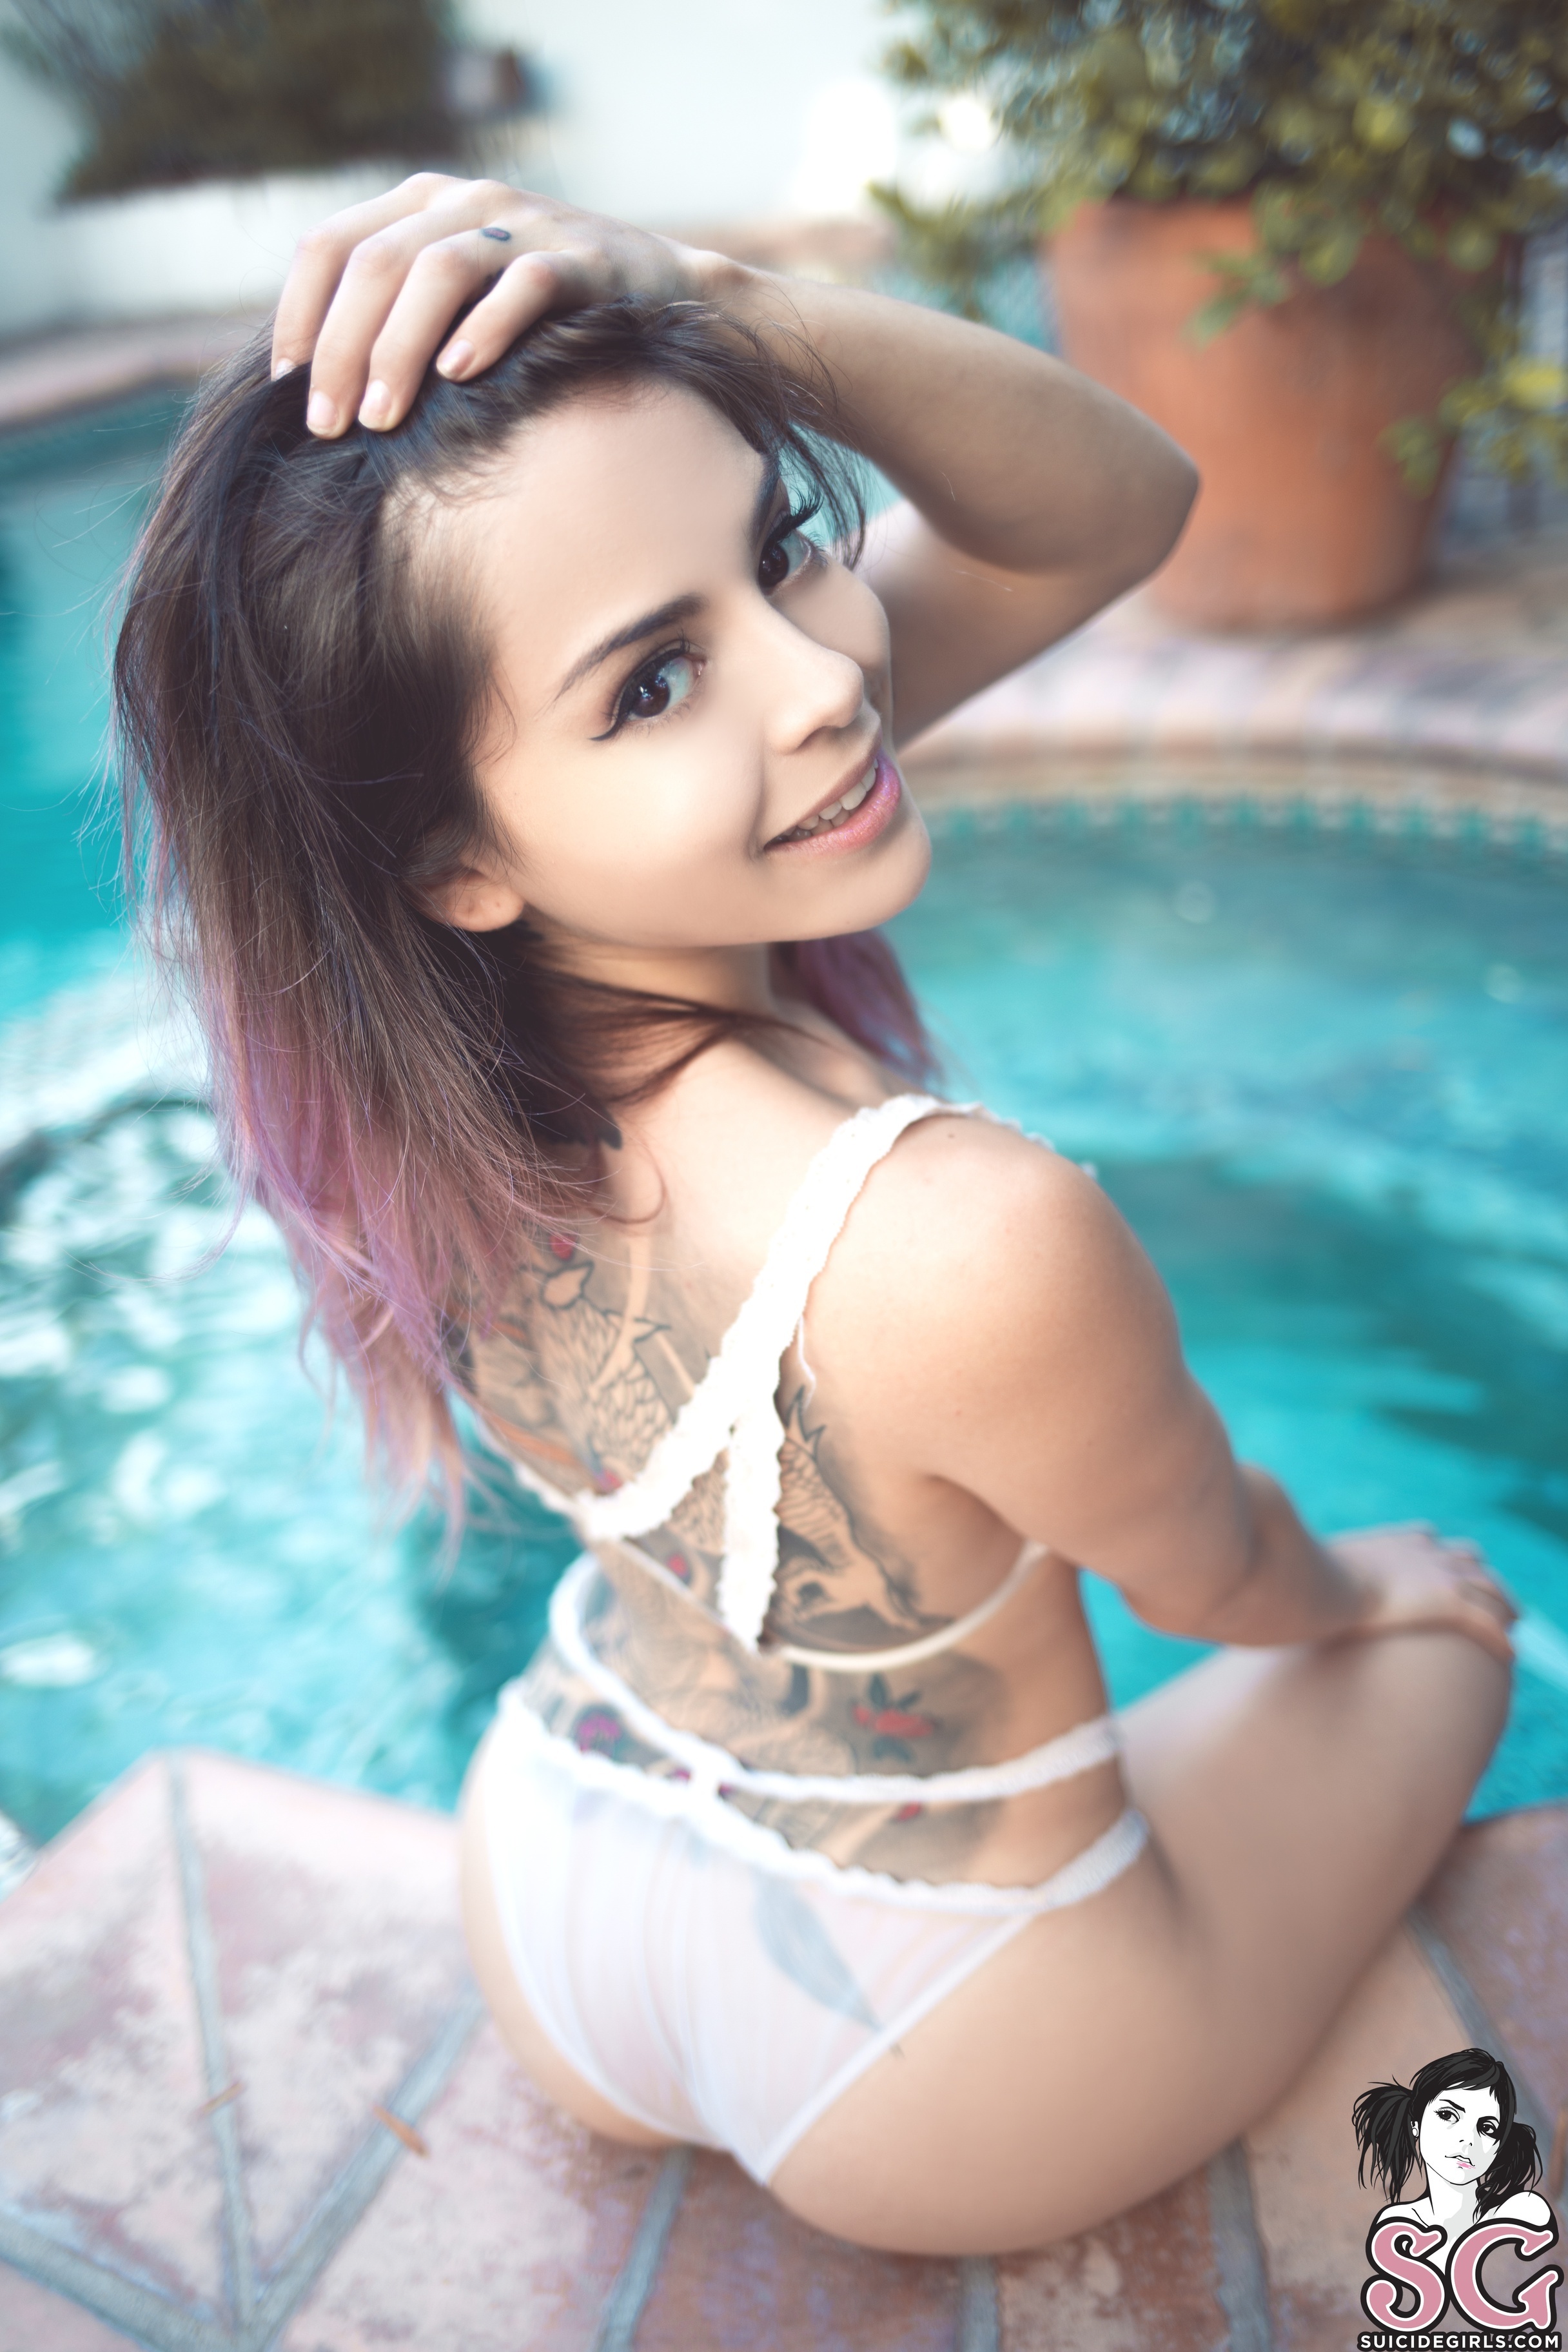 People 2432x3648 Satin Suicide Suicide Girls women model tattoo swimming pool back see-through panties white thong sensual gaze smiling petite looking at viewer hand(s) in hair brunette portrait display watermarked